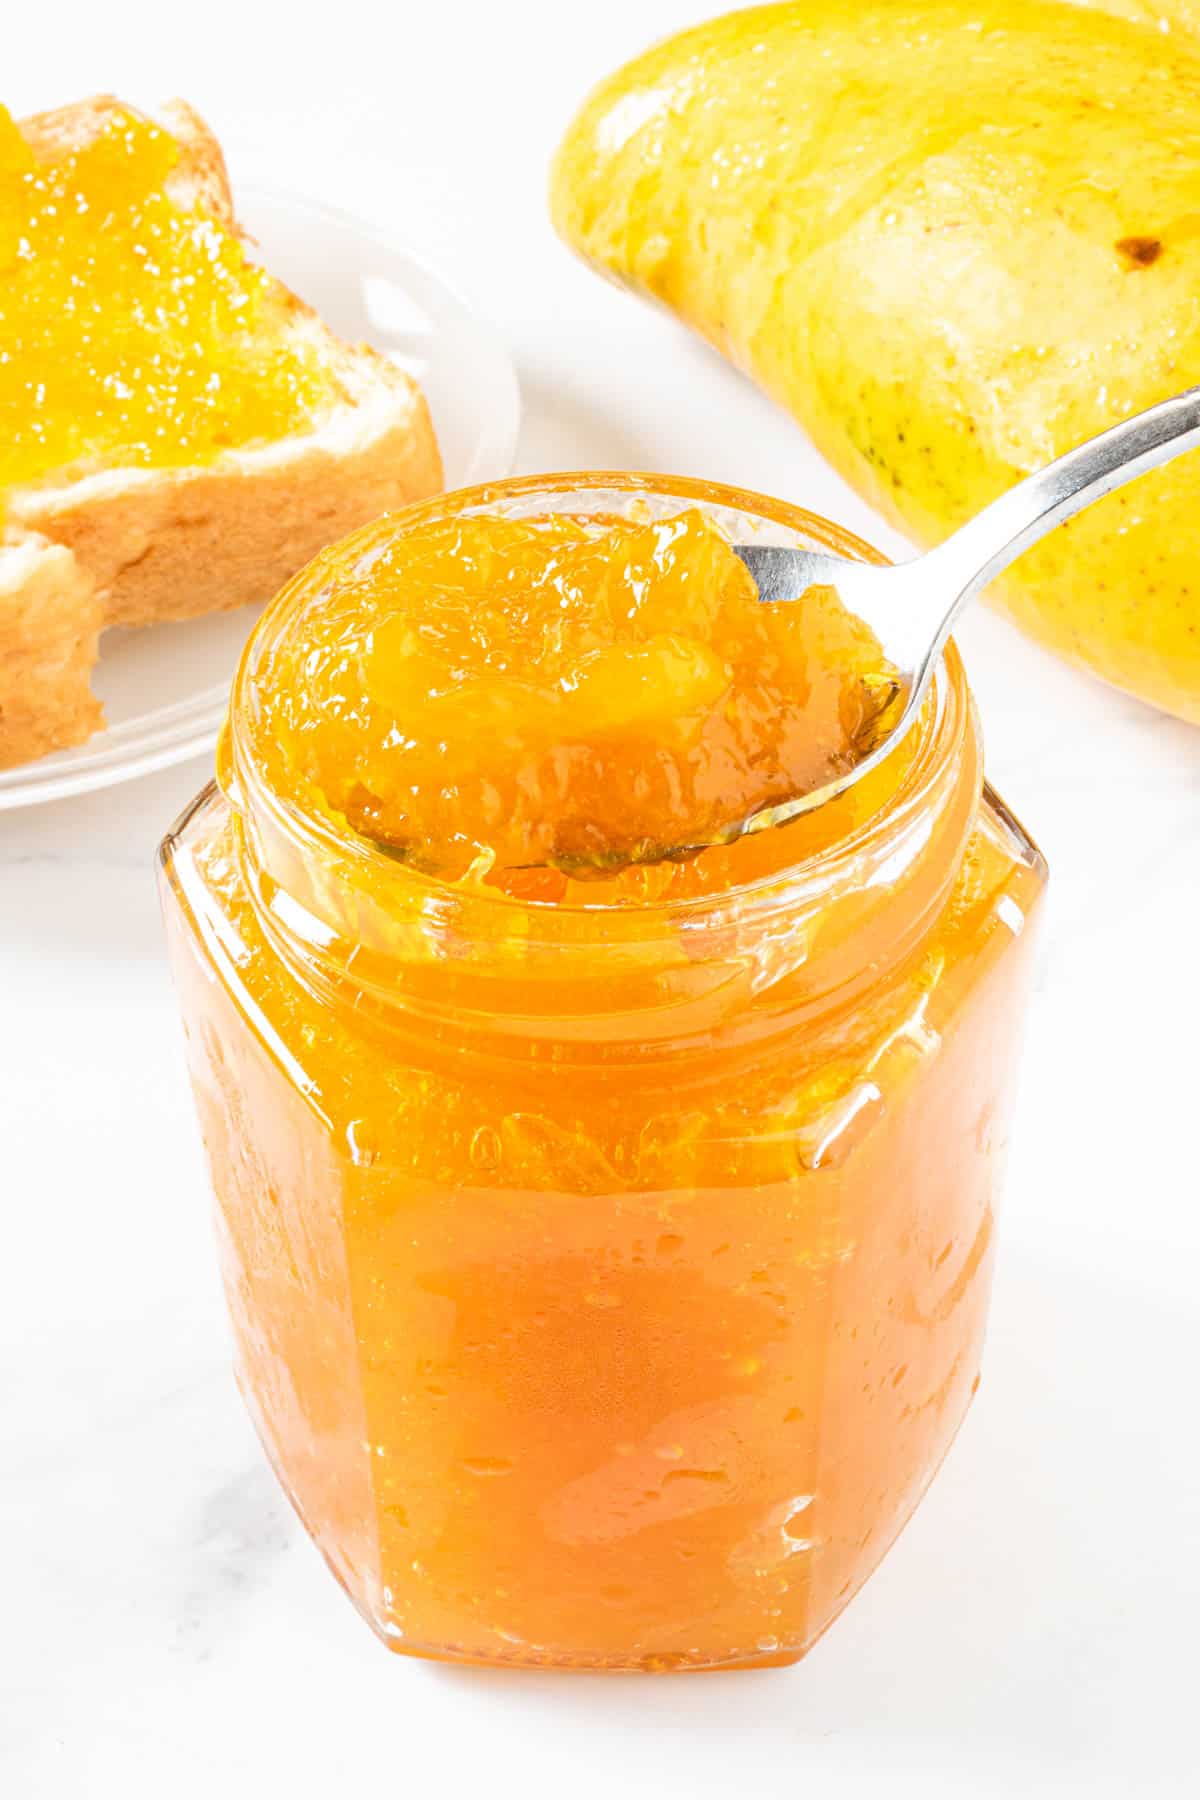 A spoon of yellow jam scooped out of a glass jar.